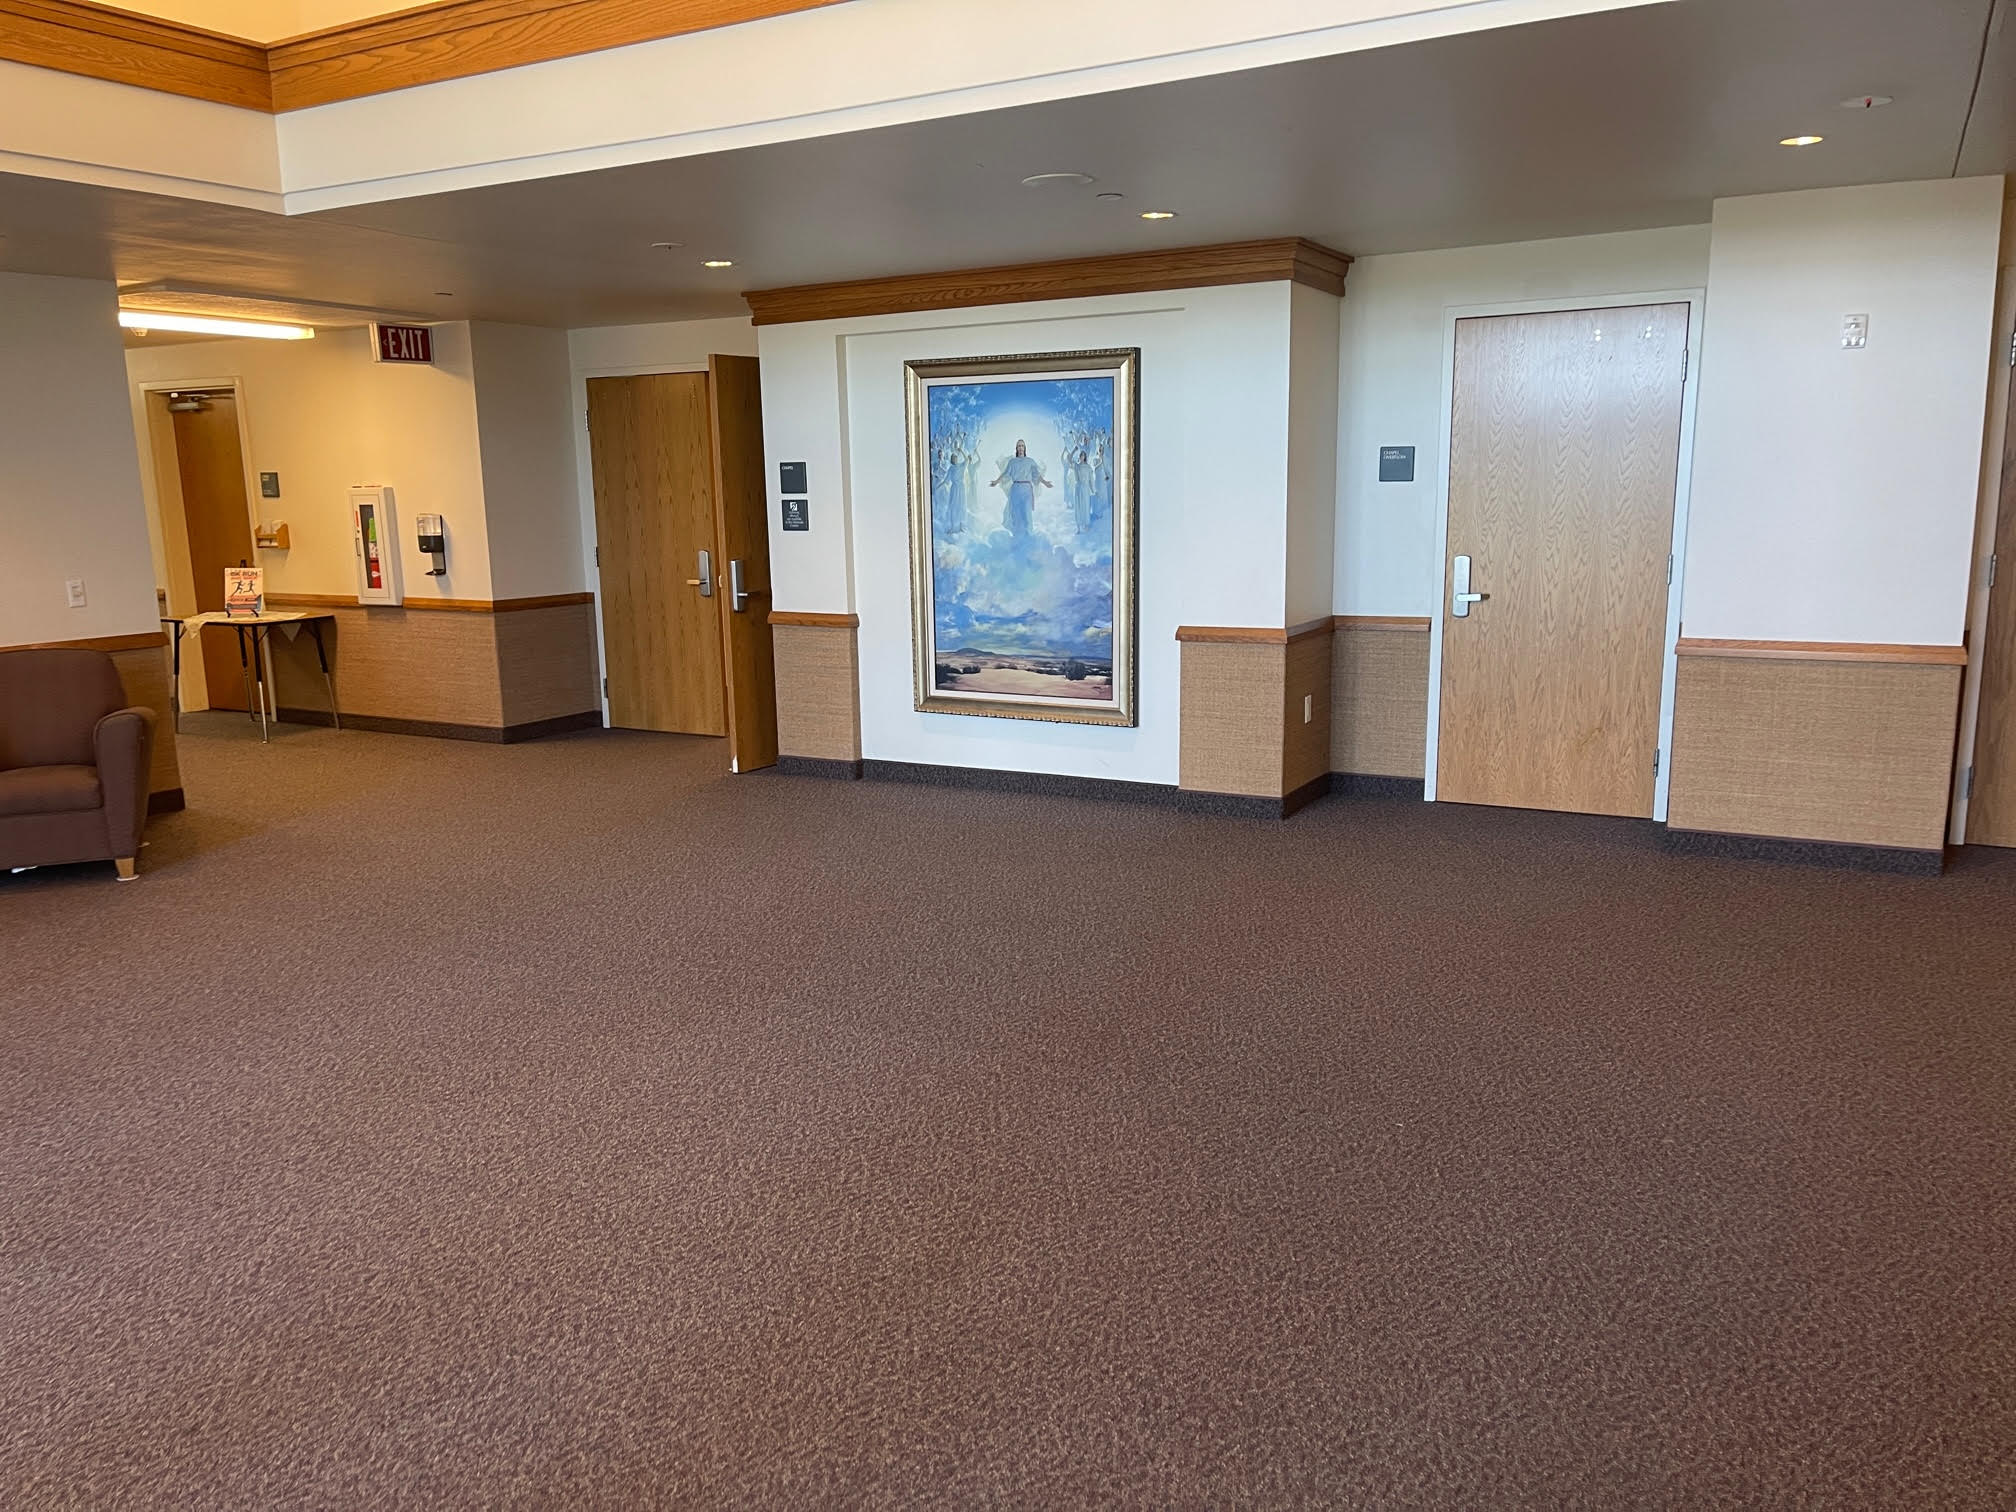 Main lobby of The Church of Jesus Christ of Latter-day Saints at 5401 Westwind Way, with a painting of Jesus Christ on the wall.